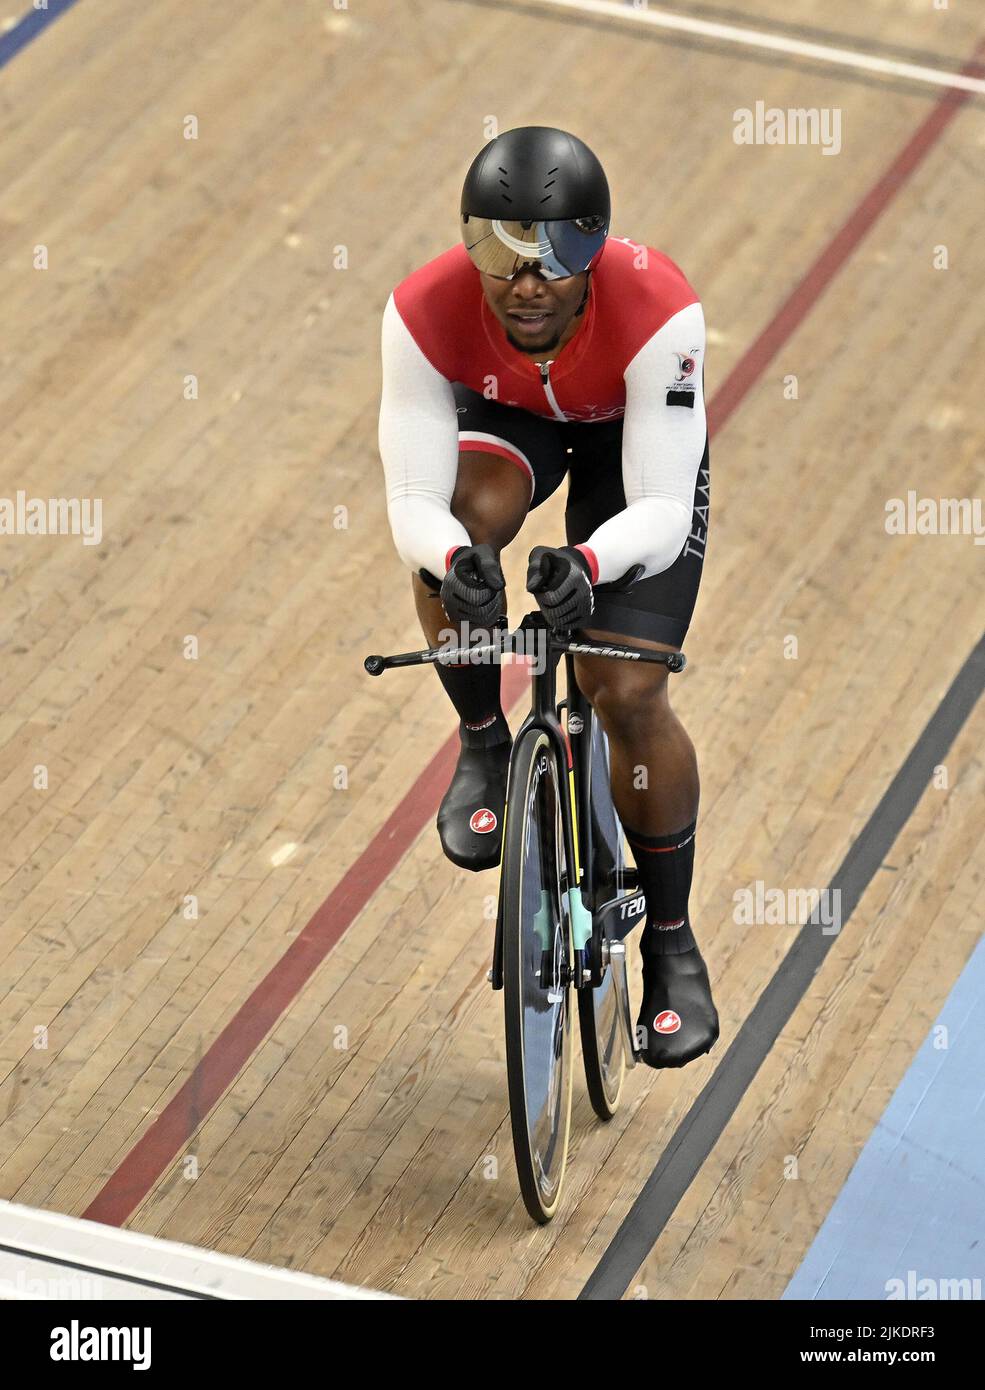 Stratford, United Kingdom. 01st Aug, 2022. Commonwealth Games Track Cycling. Olympic Velodrome. Stratford. Nicholas Paul (TTO) during the Mens 1000m Time Trial. Credit: Sport In Pictures/Alamy Live News Stock Photo